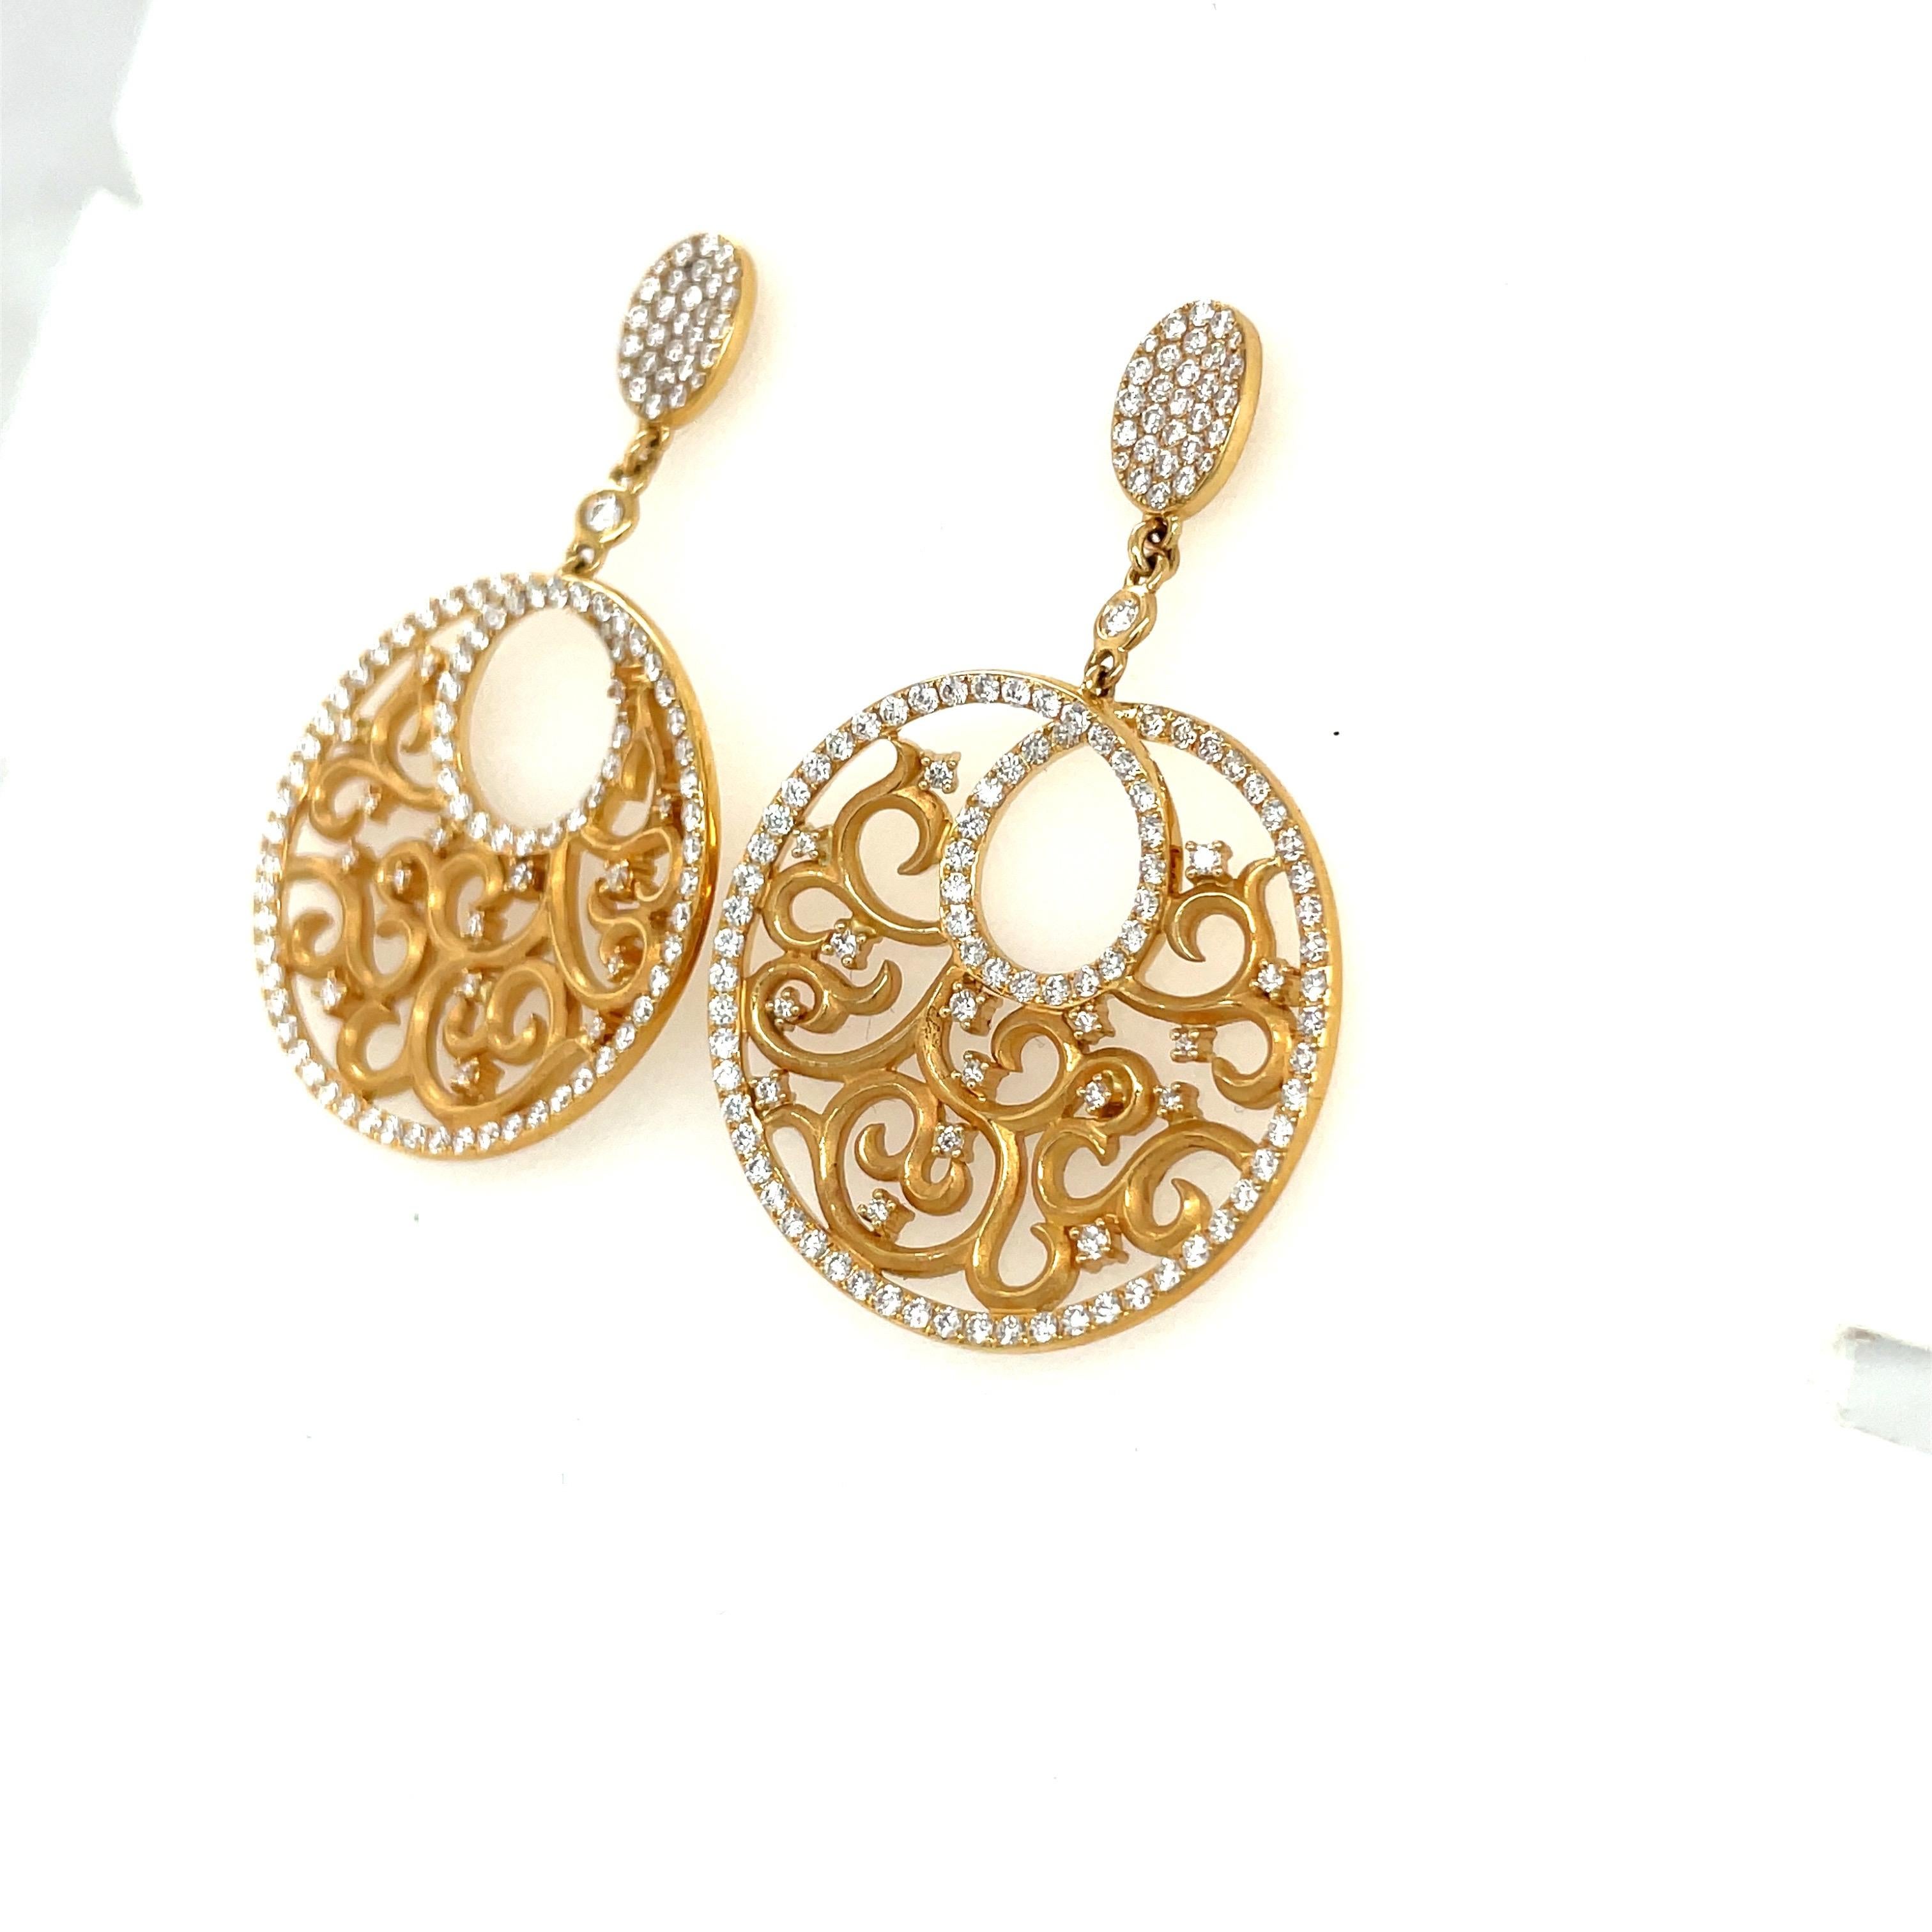 Lovely 18 karat yellow gold hanging earrings. These earrings are designed with a hanging open circle disc which has been cutout and accented with diamonds. The discs are outlined in diamonds hang from a oval pave diamond section. The earrings are